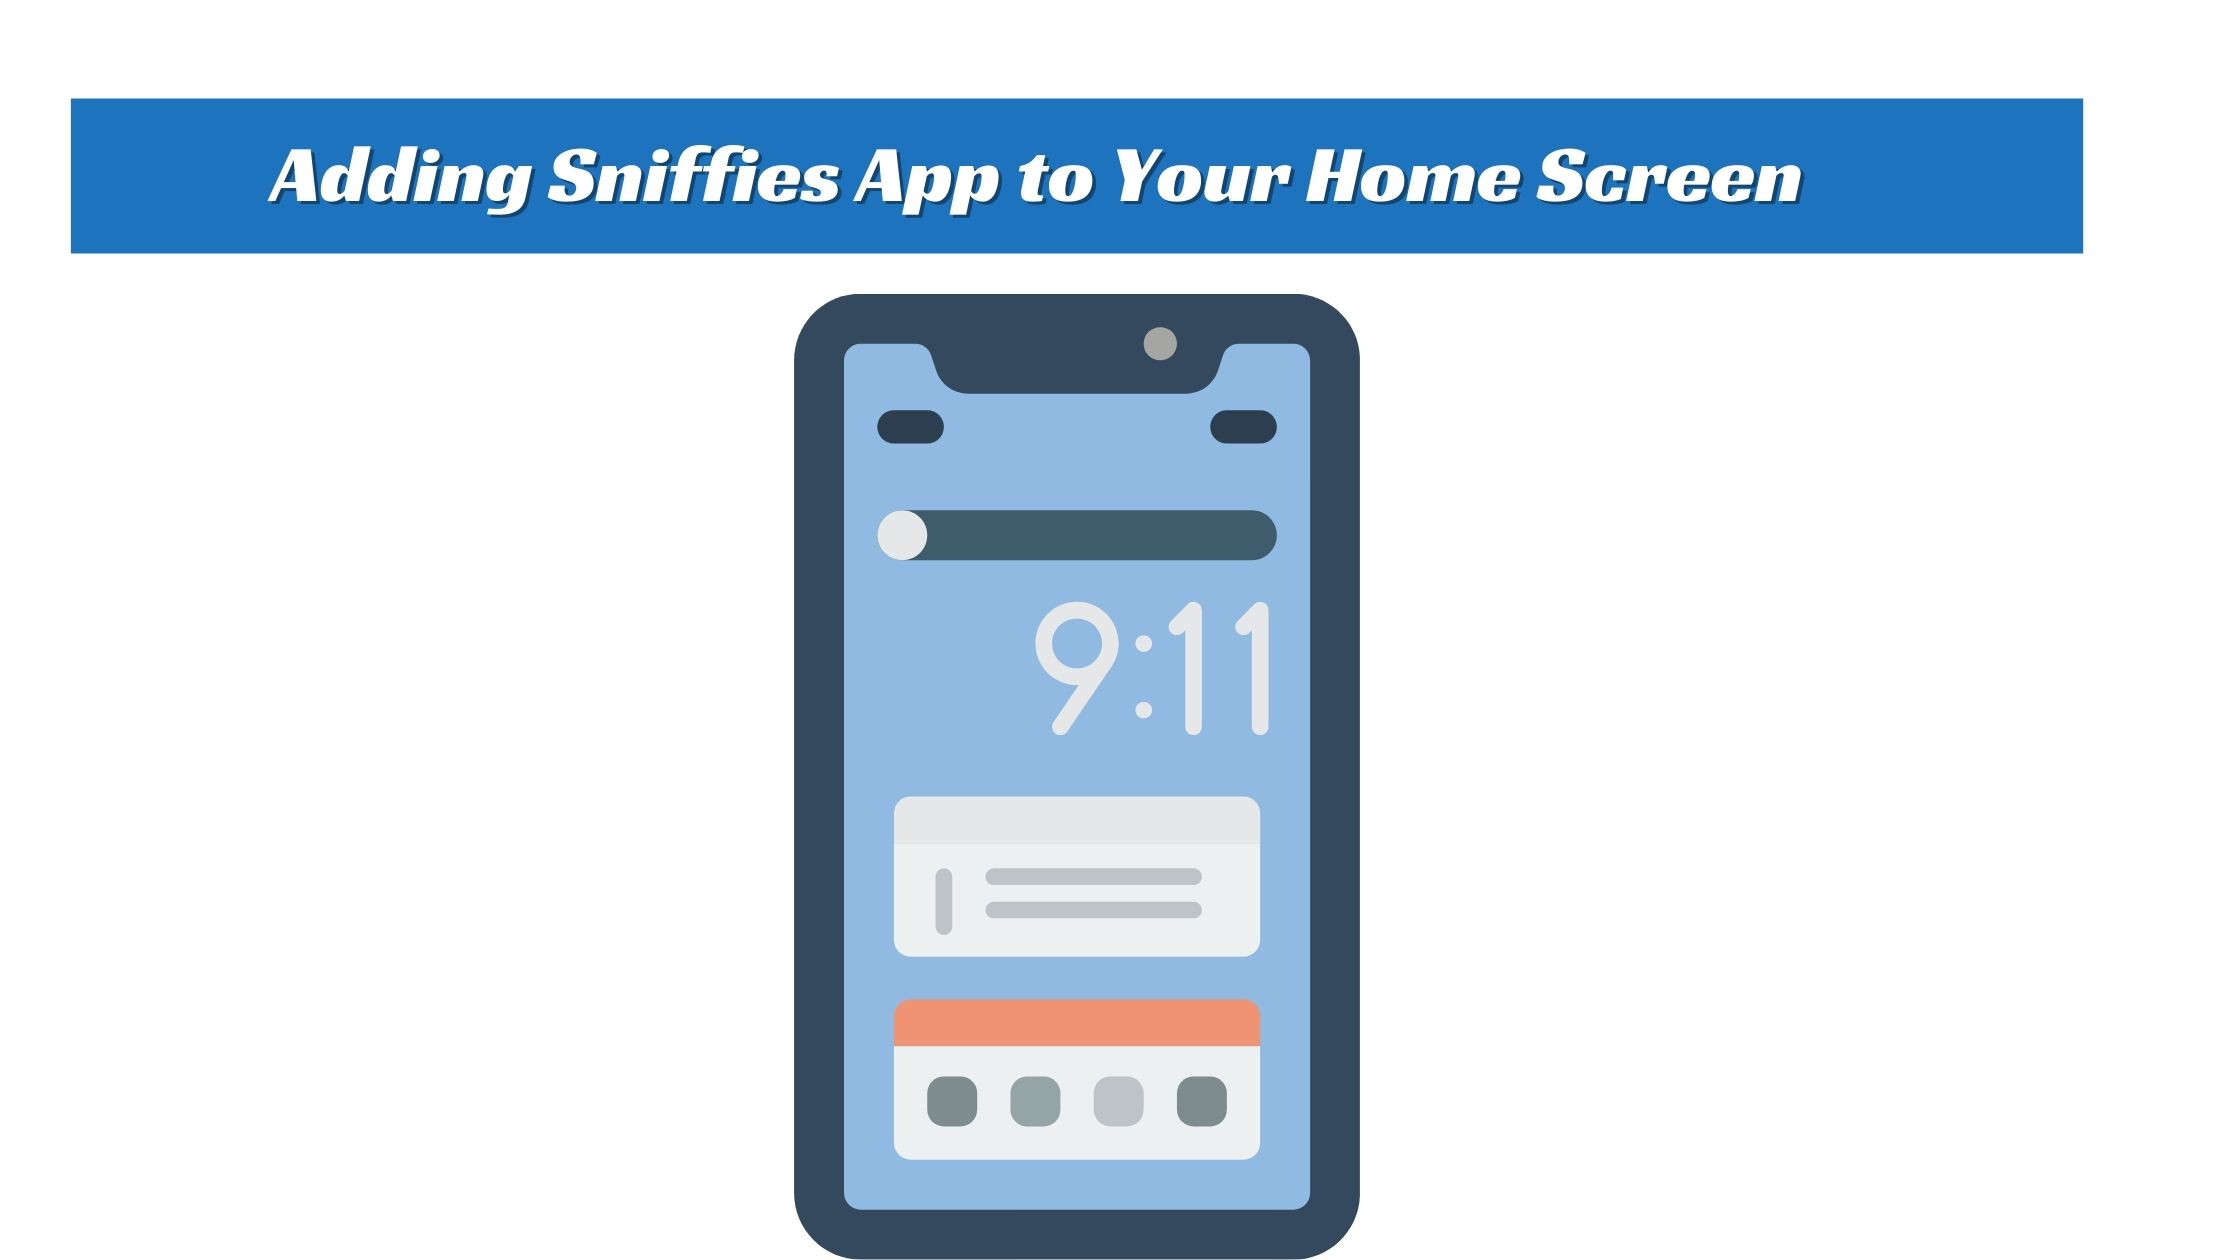 Adding Sniffies App to Your Home Screen